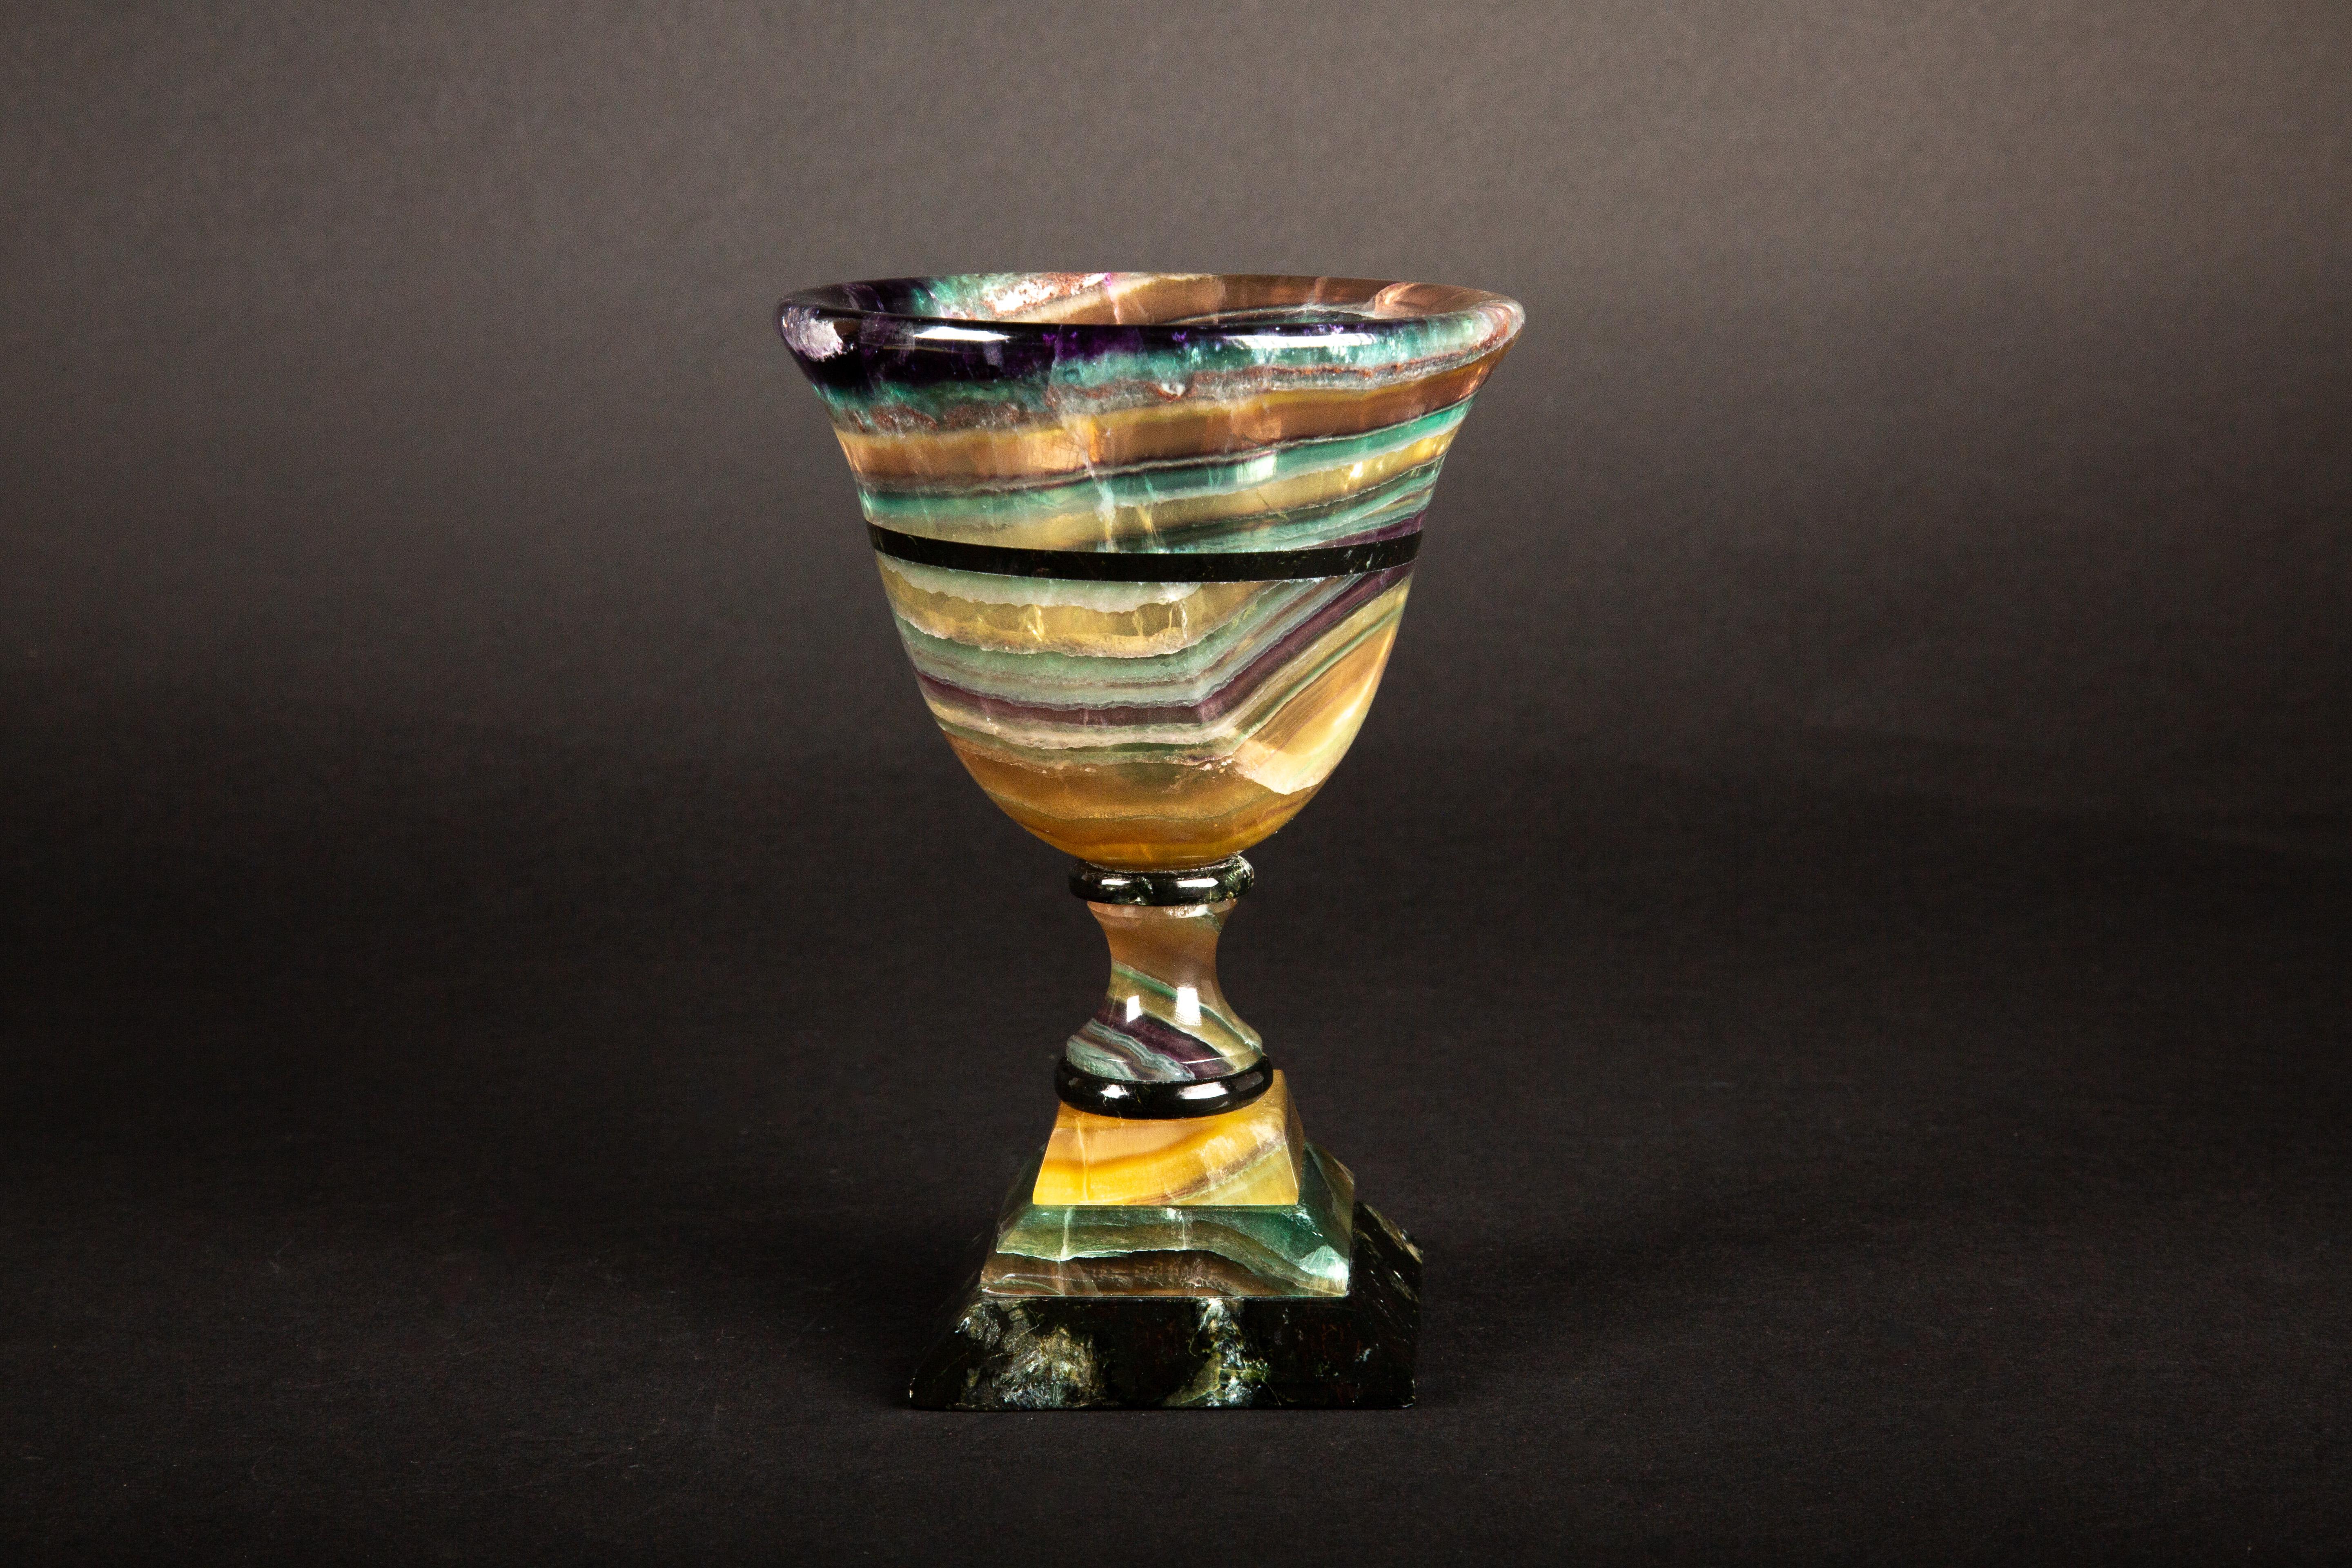 Crafted by skilled artisans in Argentina, this exquisite hand-carved chalice/cup showcases the captivating beauty of multi-colored fluorite. Originating from the depths of the earth, fluorite's unique hues swirl together in mesmerizing patterns,